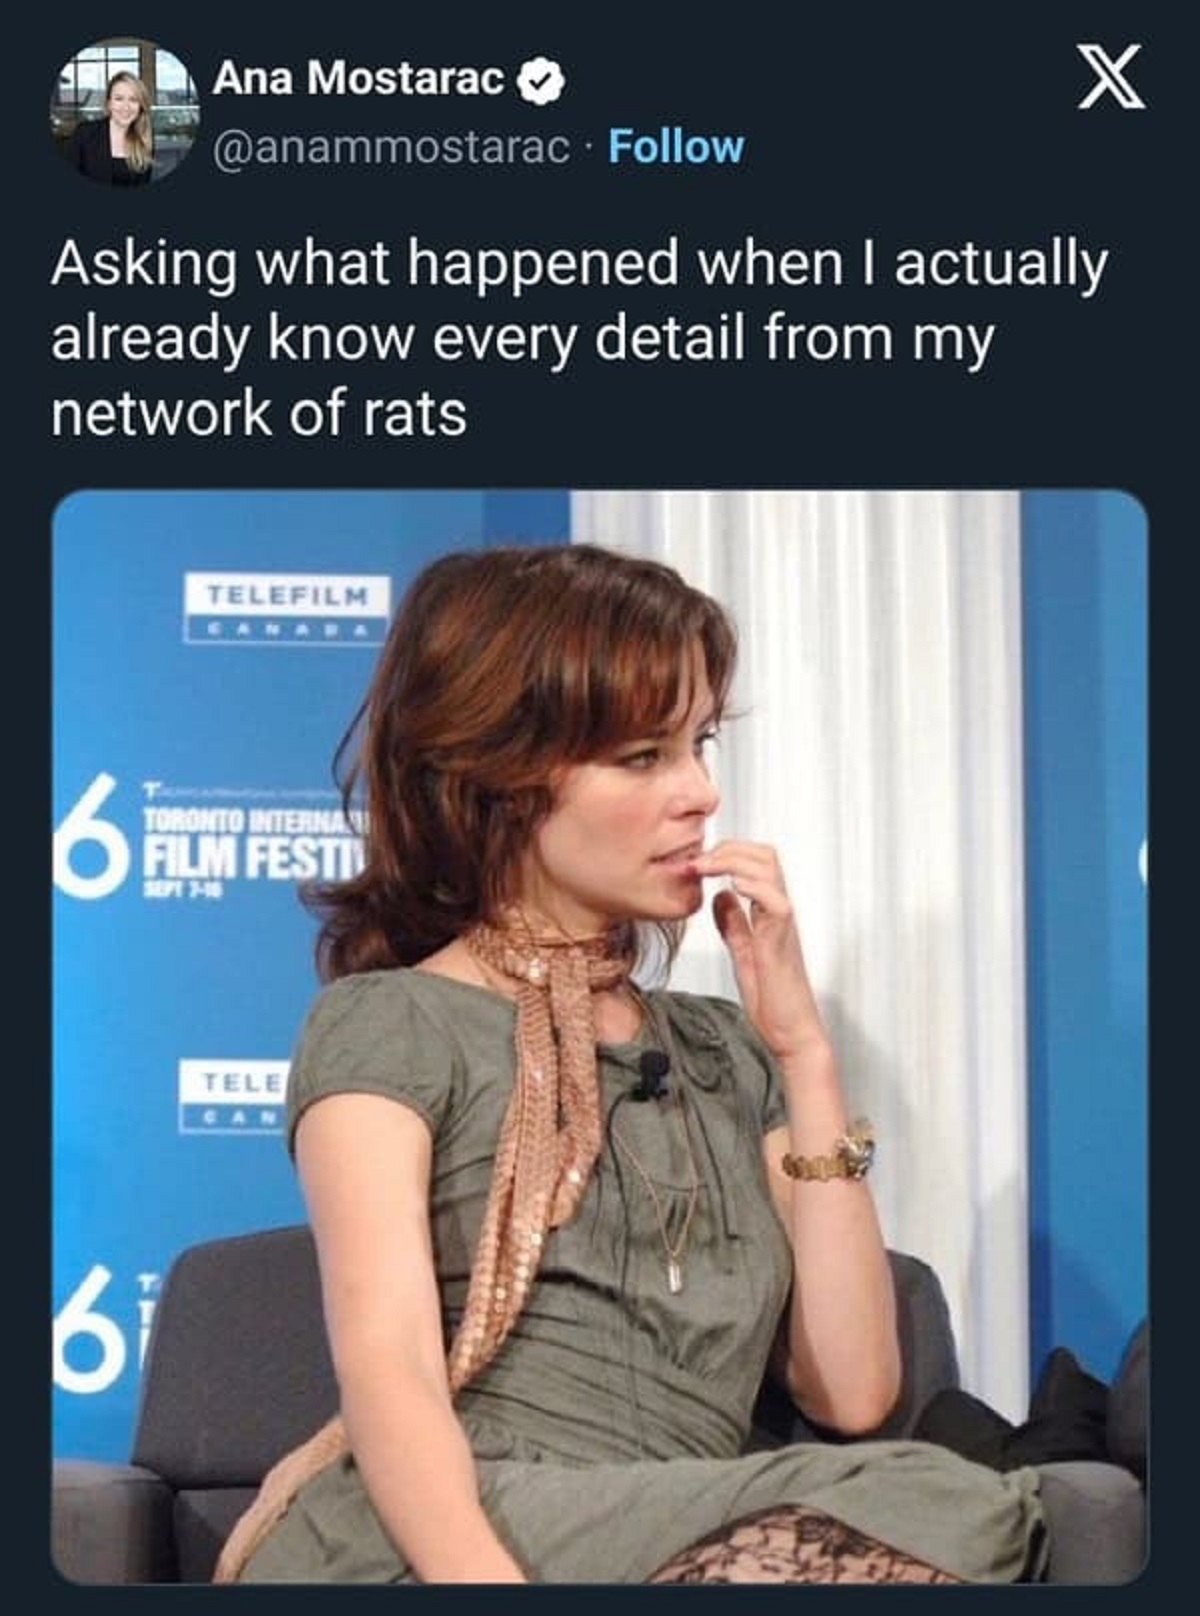 parker posey toronto film festival - Ana Mostarac X Asking what happened when I actually already know every detail from my network of rats Telefilm Canari 6 Toronto Internan Film Festi Sept 716 10 Tele Can